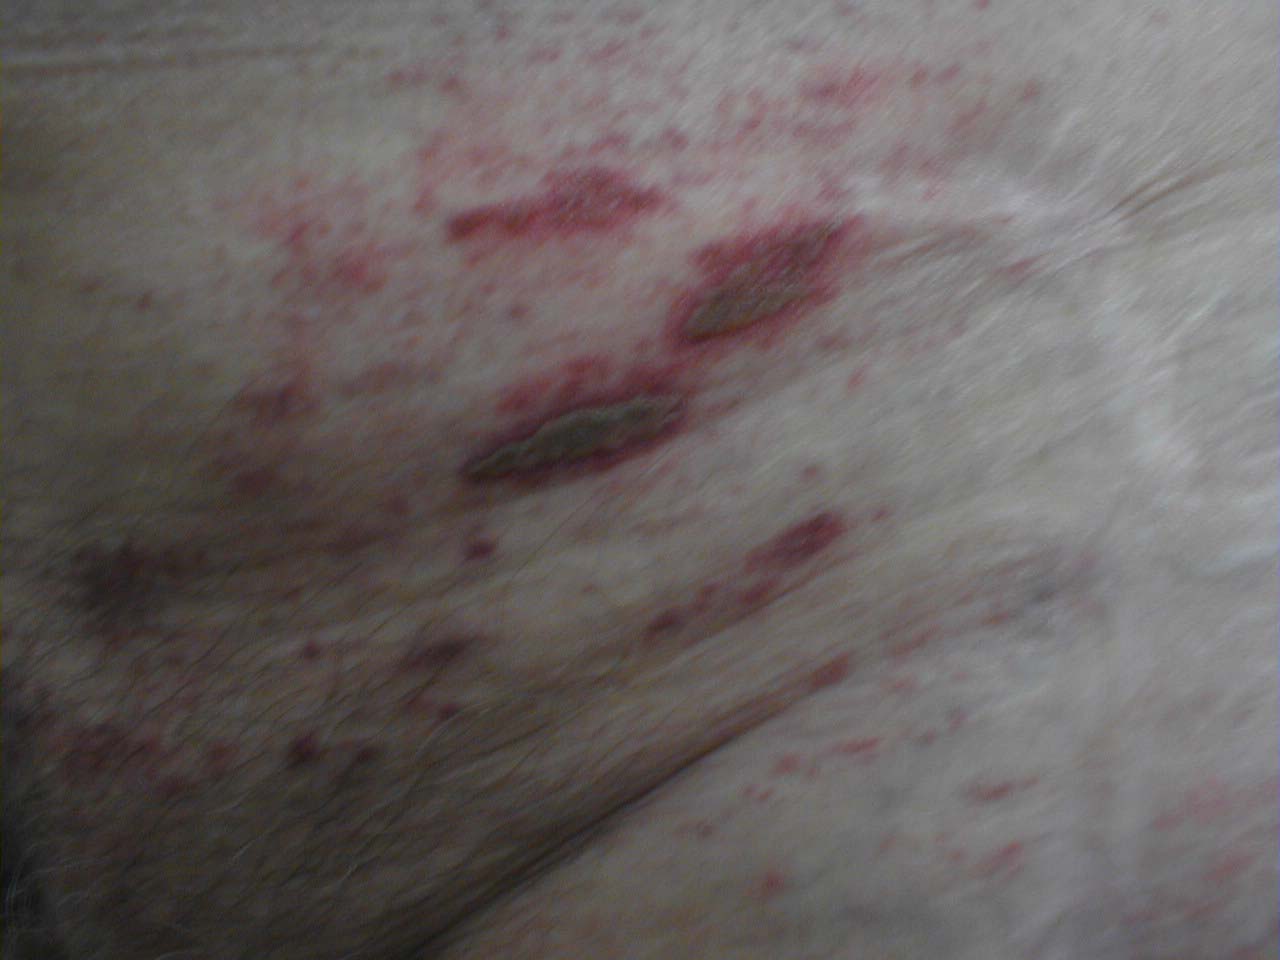 Herpes Zoster: Coalesced vesicles resulting from reativation of HZV infection.